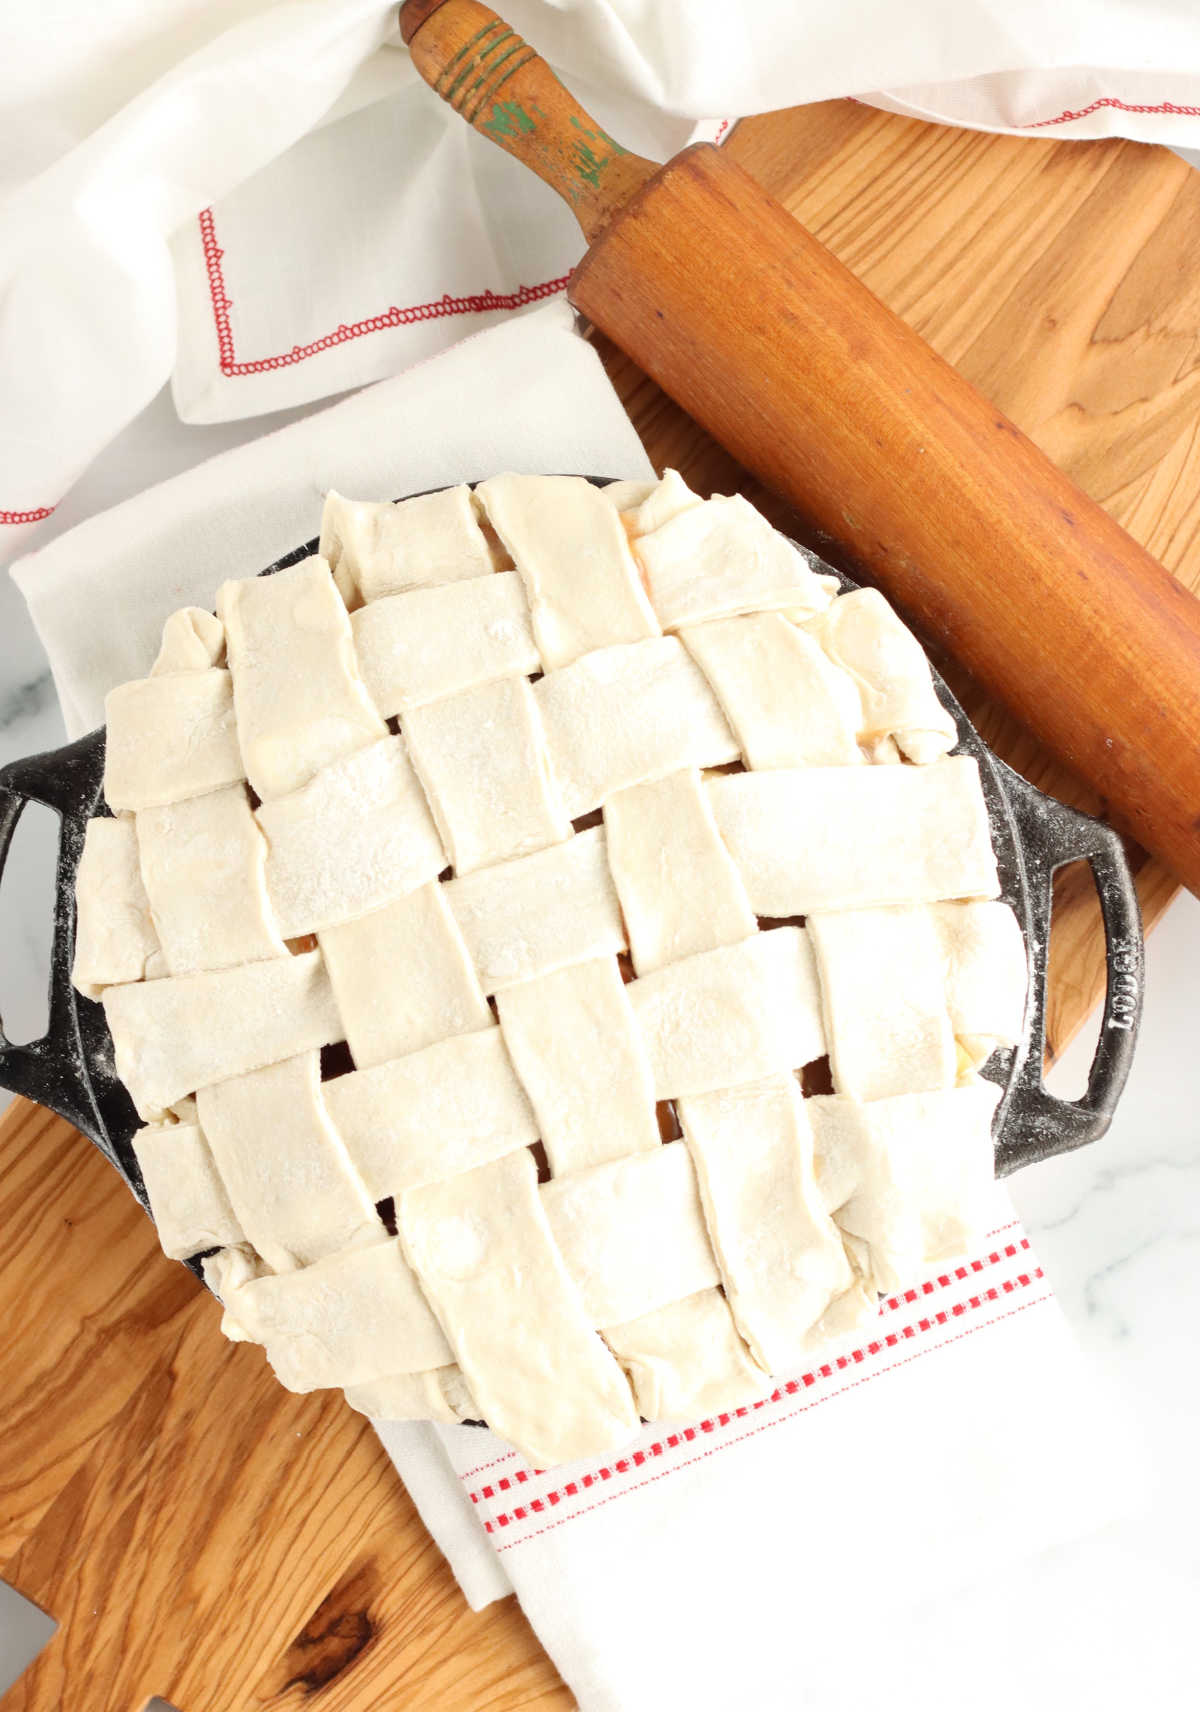 Lattice pie crust on unbaked pie in dual handle cast iron pan on wooden cutting board.